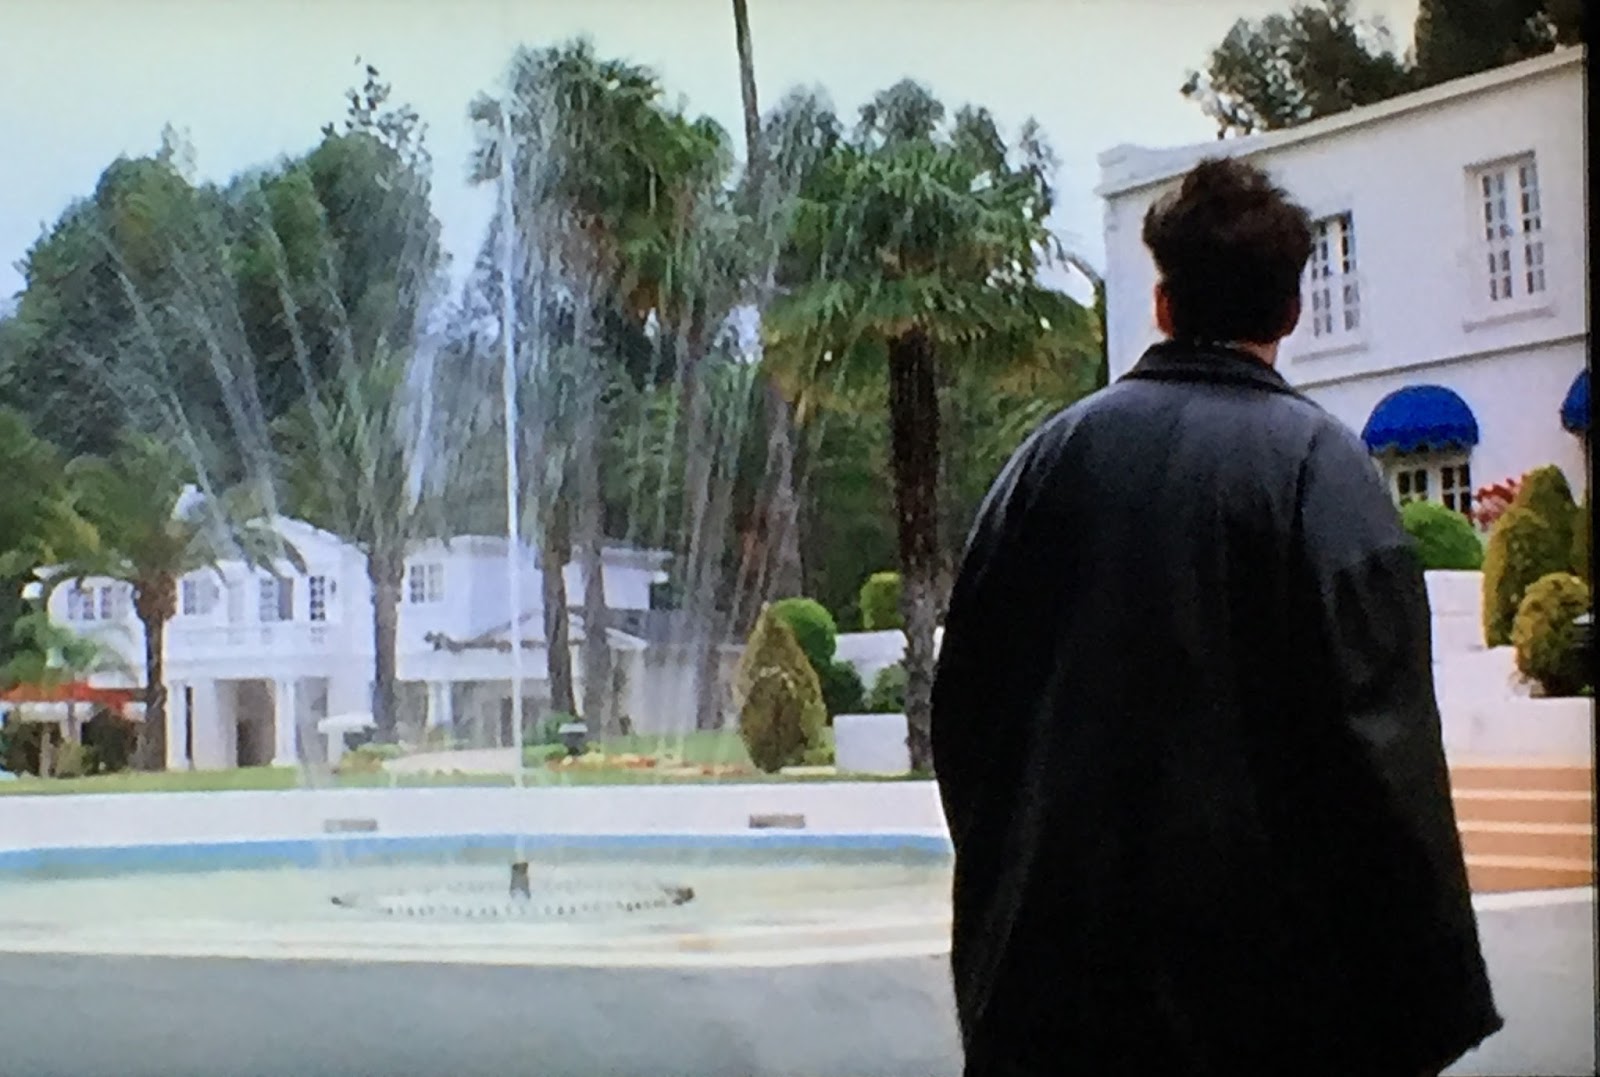 Less Than Zero Filming Locations